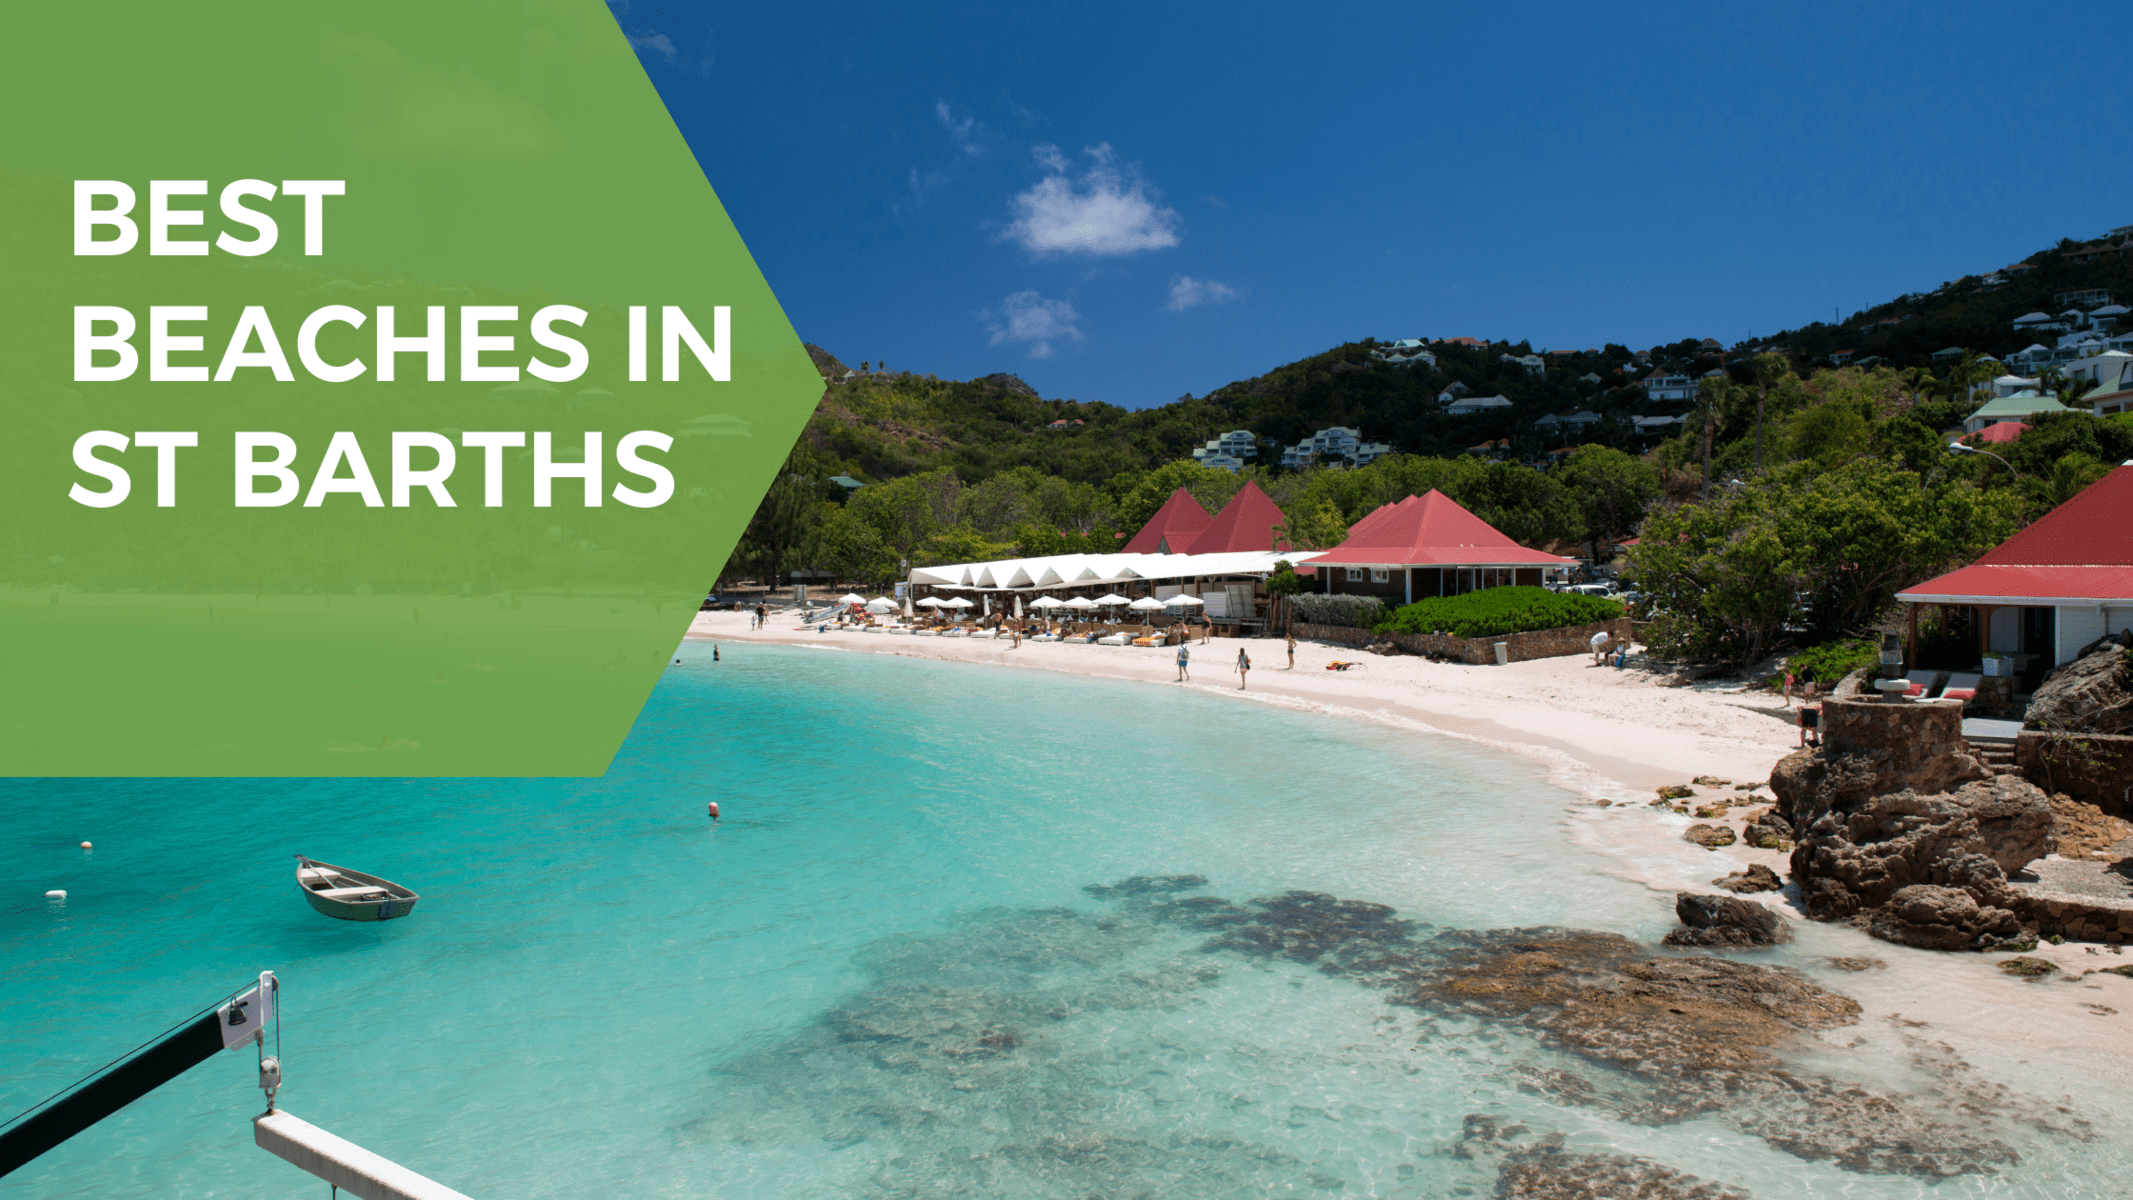 St Barts Vacation - Everything You Need To Know - Epic Caribbean